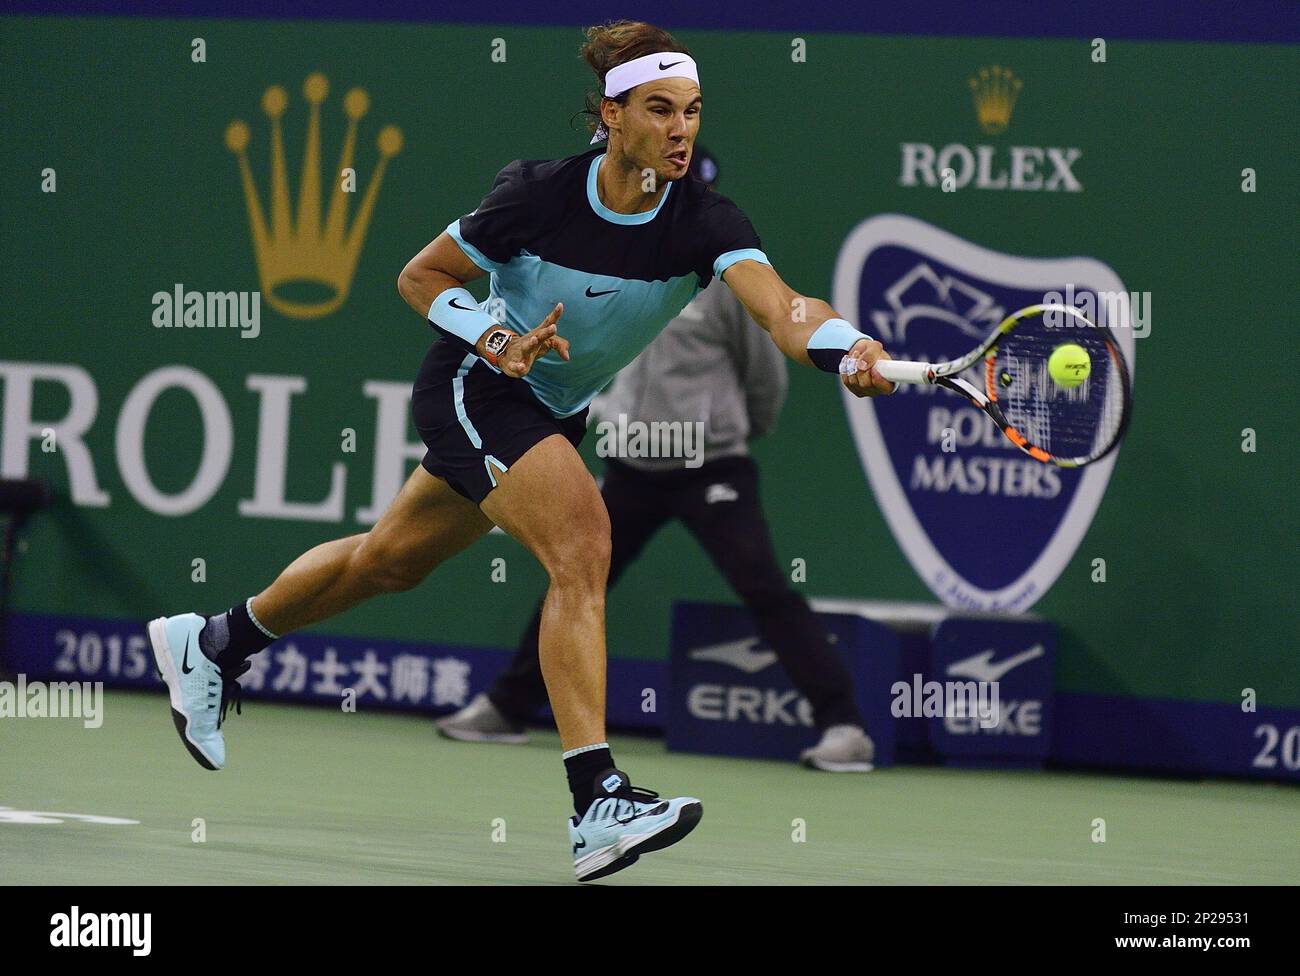 Oct. 17, 2015 - Shanghai, People's Republic of China - RAFAEL NADAL of  Spain during the match against JO WILFRIED TSONGA of France, during the  semi - finals of the Shanghai Rolex